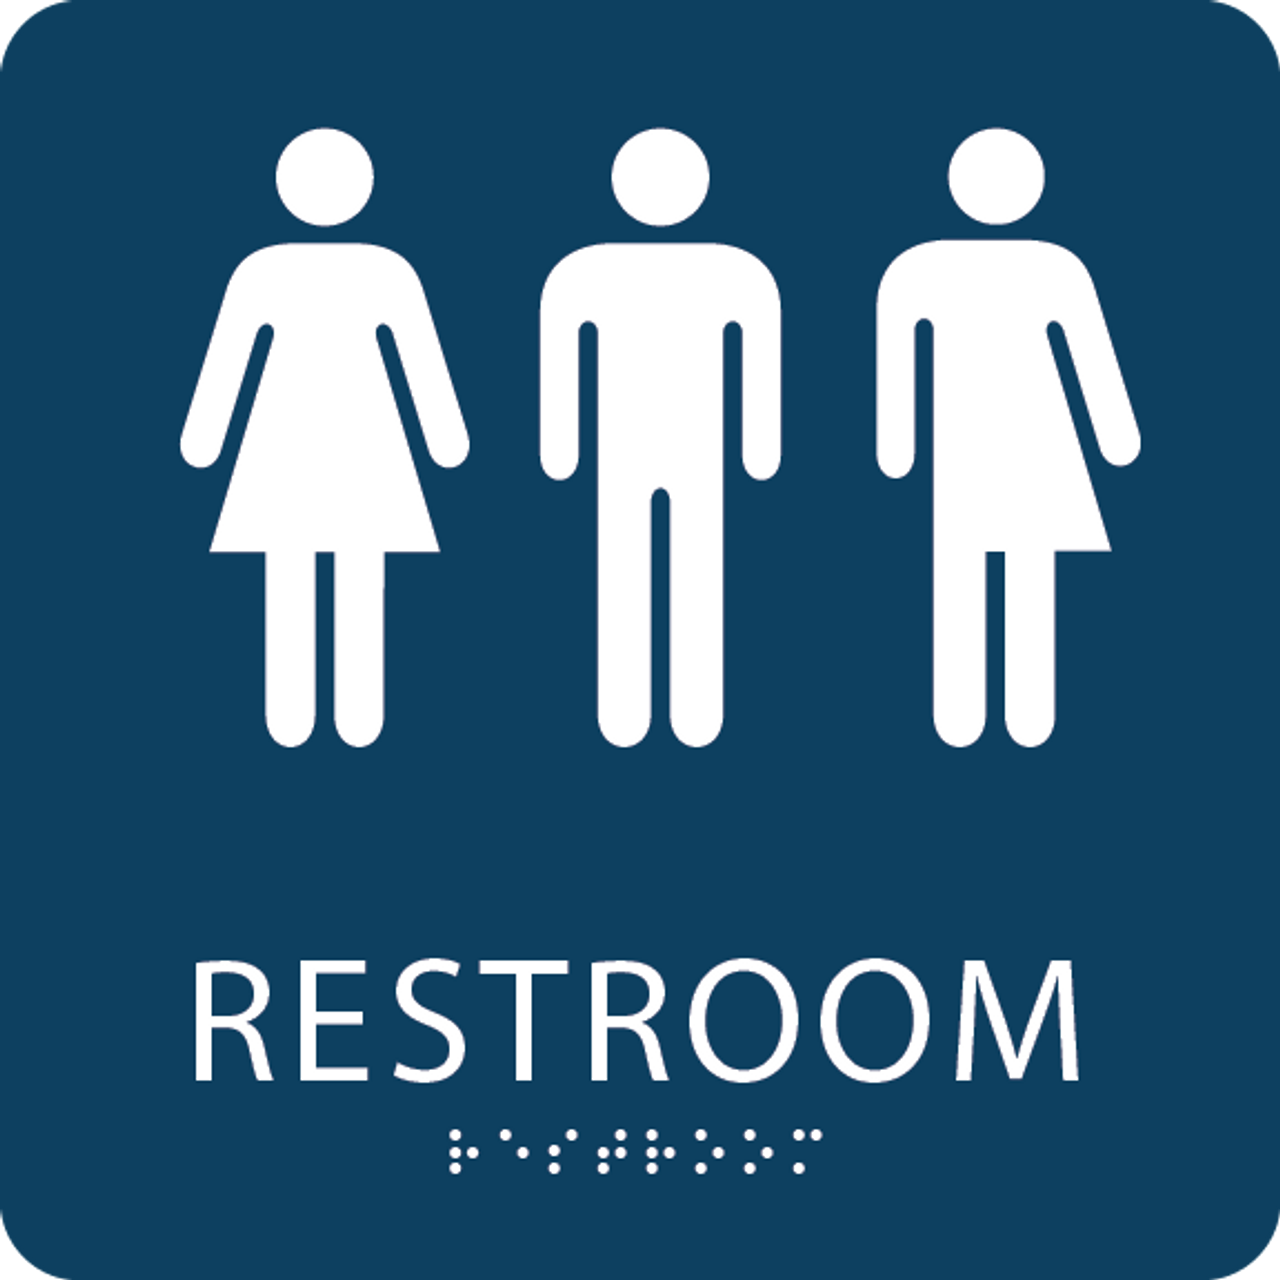 A gender neutral bathroom sign, representing the concept that Allderdice students were advocating for. (ADA Signs)